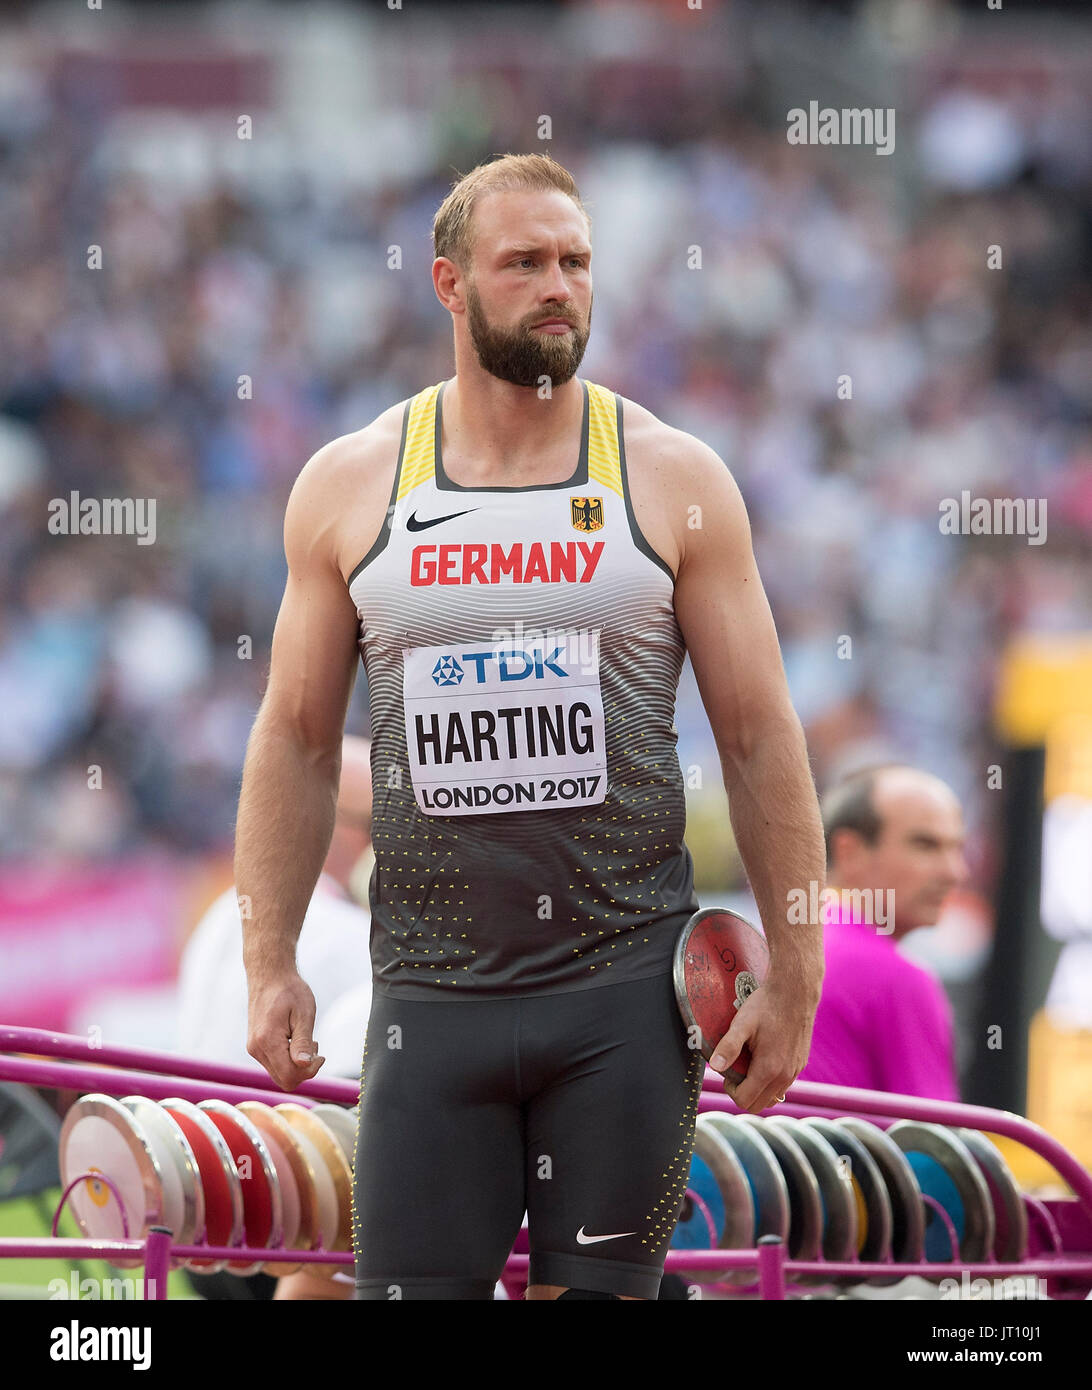 Robert harting 2017 hi-res stock photography and images - Alamy